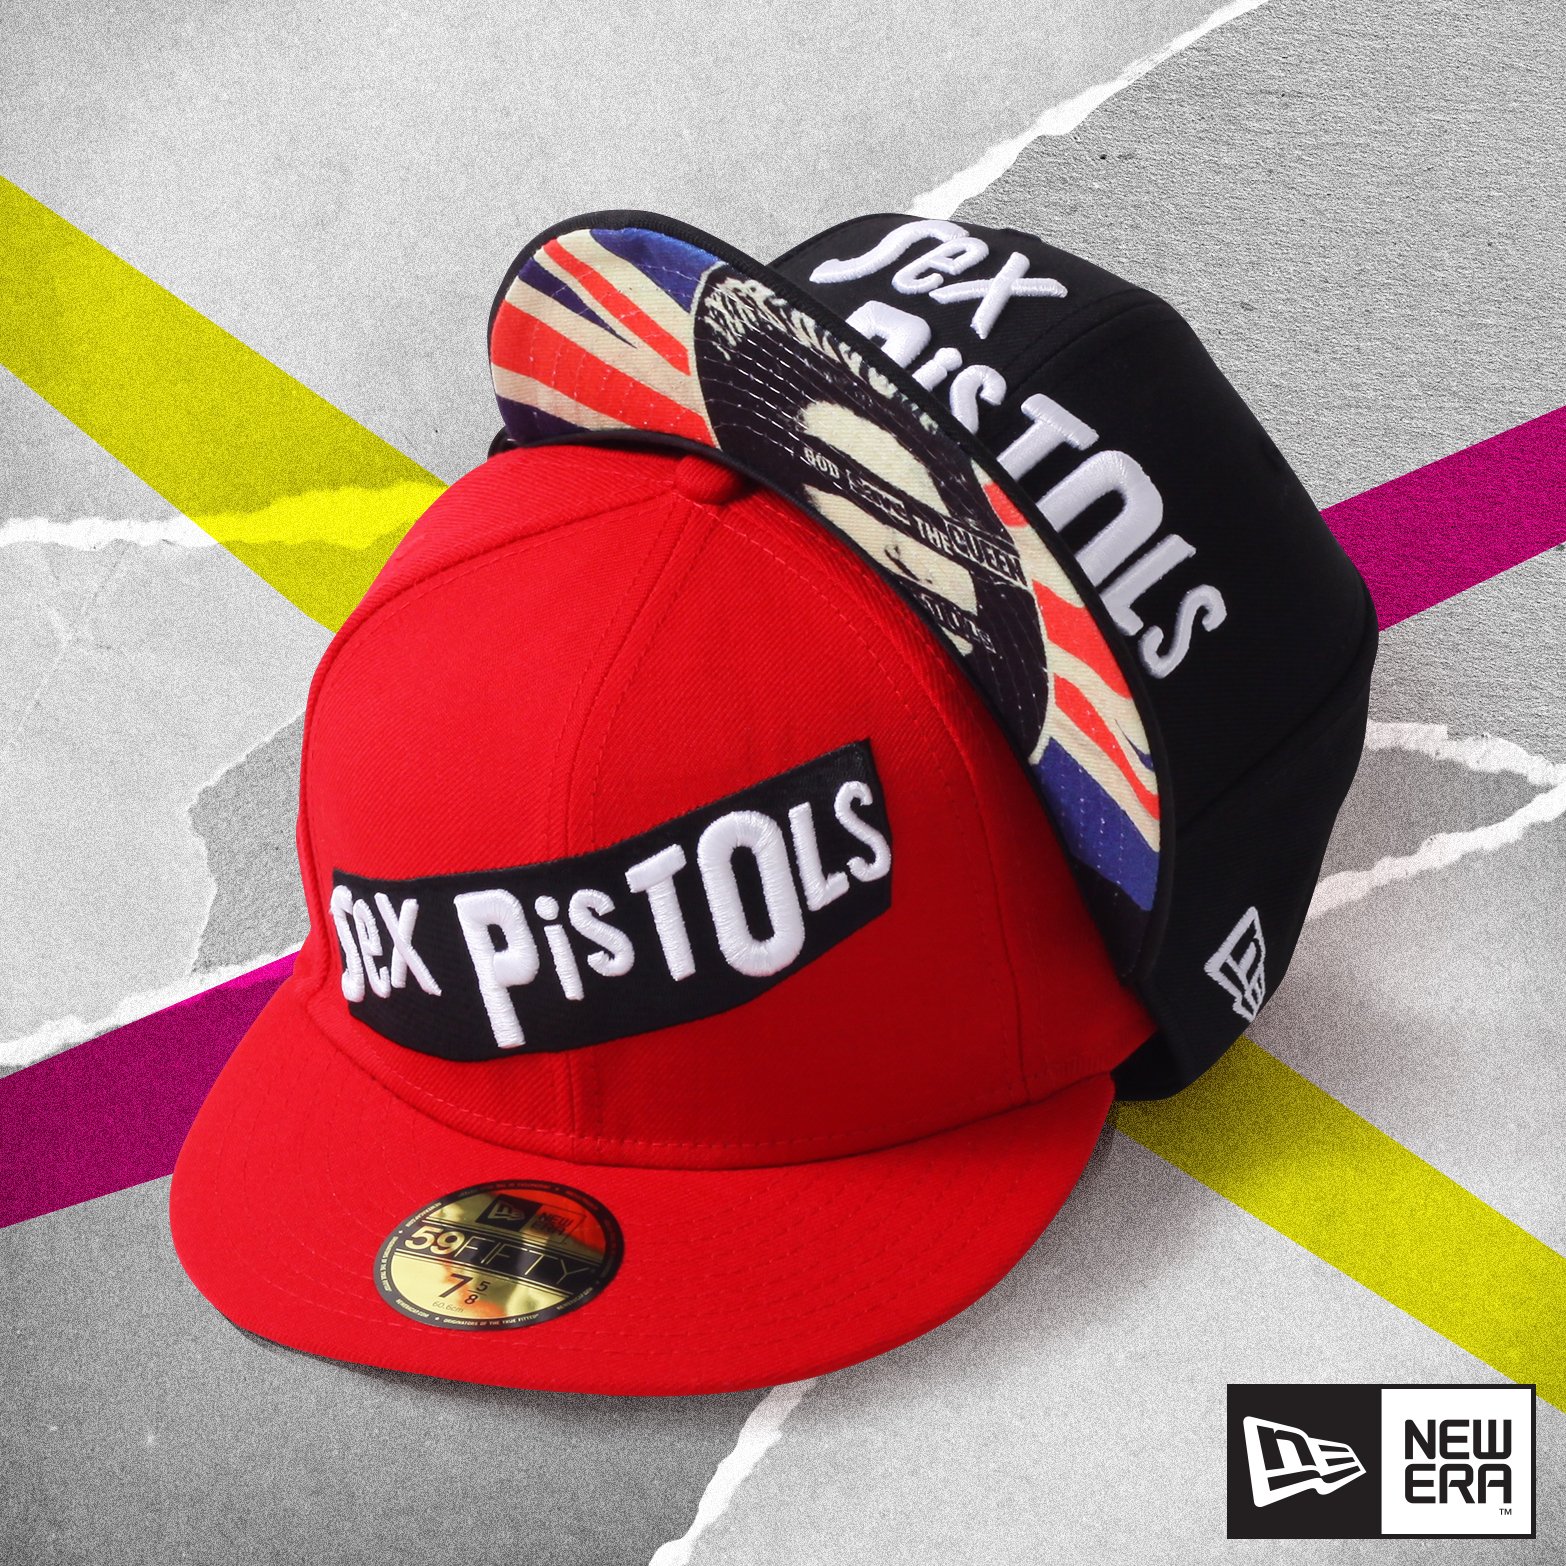 Salie beest levenslang New Era Cap PH on Twitter: "Are you ready to rock these Sex Pistols caps?  Retail price: Php 2095 Get them in our Megamall and TriNoma store  https://t.co/h9qDsPbnPw" / Twitter